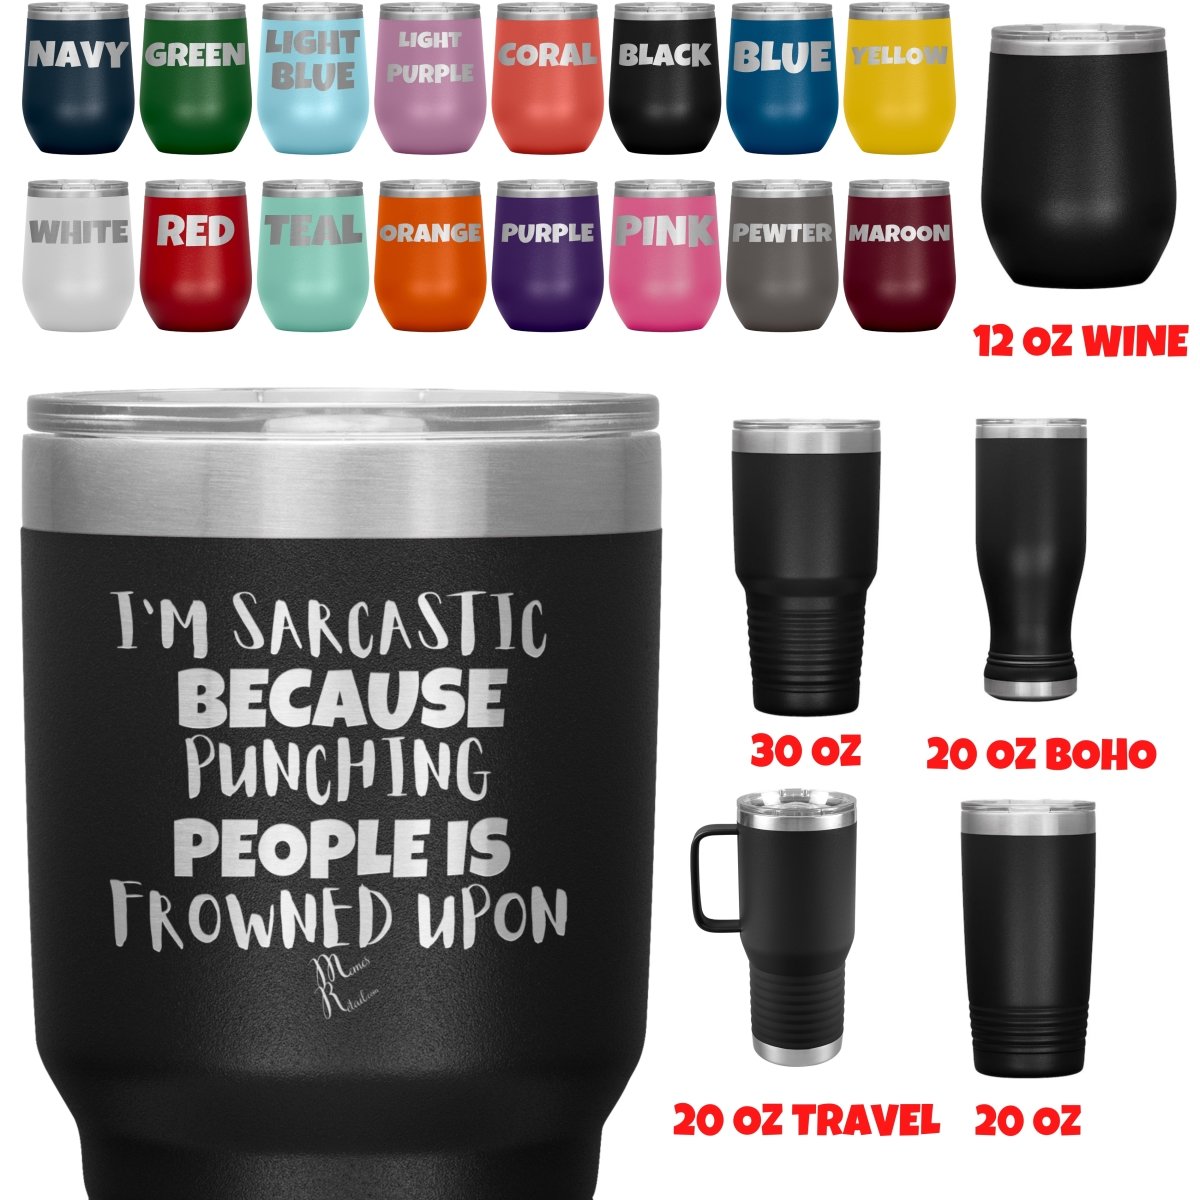 I'm Sarcastic Because Punching People is Frowned Upon Tumblers, - MemesRetail.com